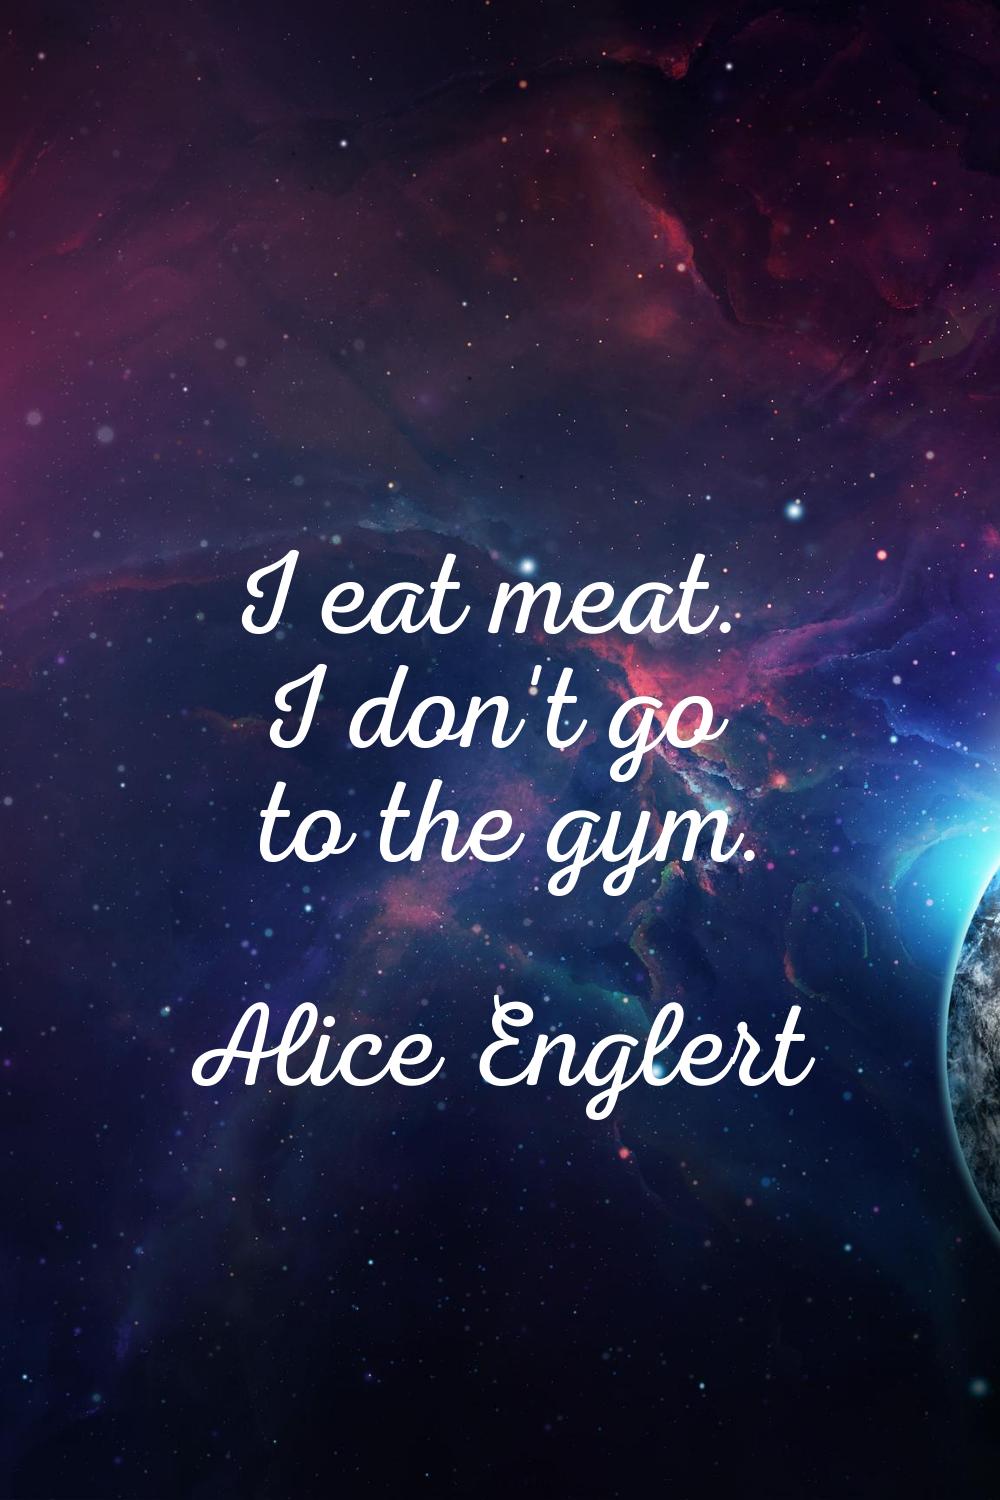 I eat meat. I don't go to the gym.